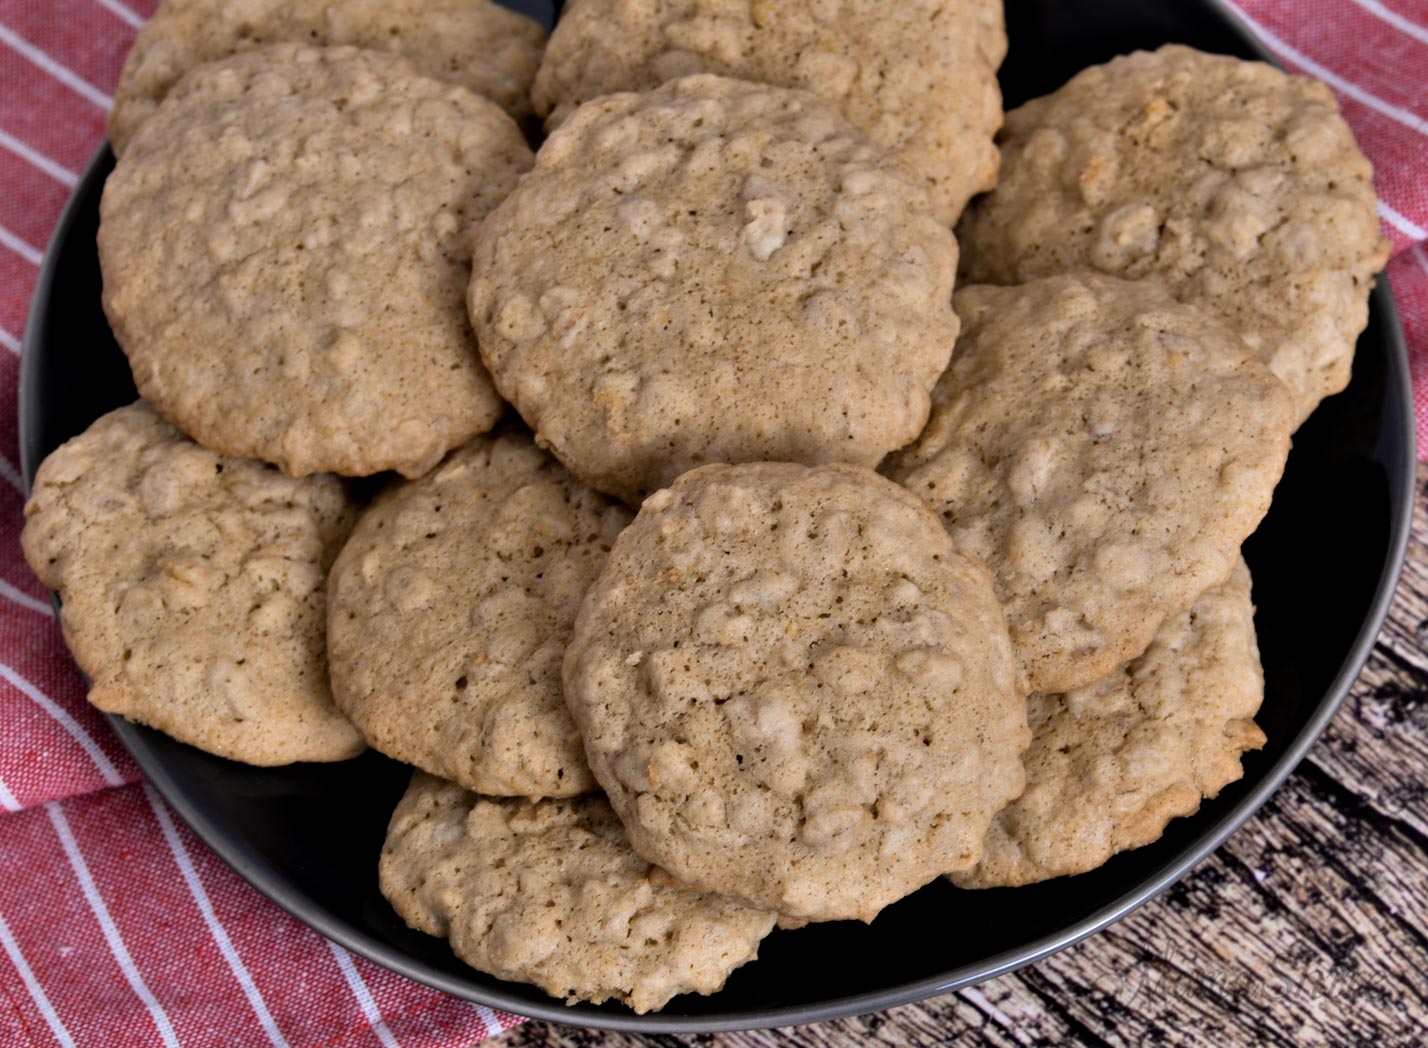 A plate of yummy oatmeal cookies.